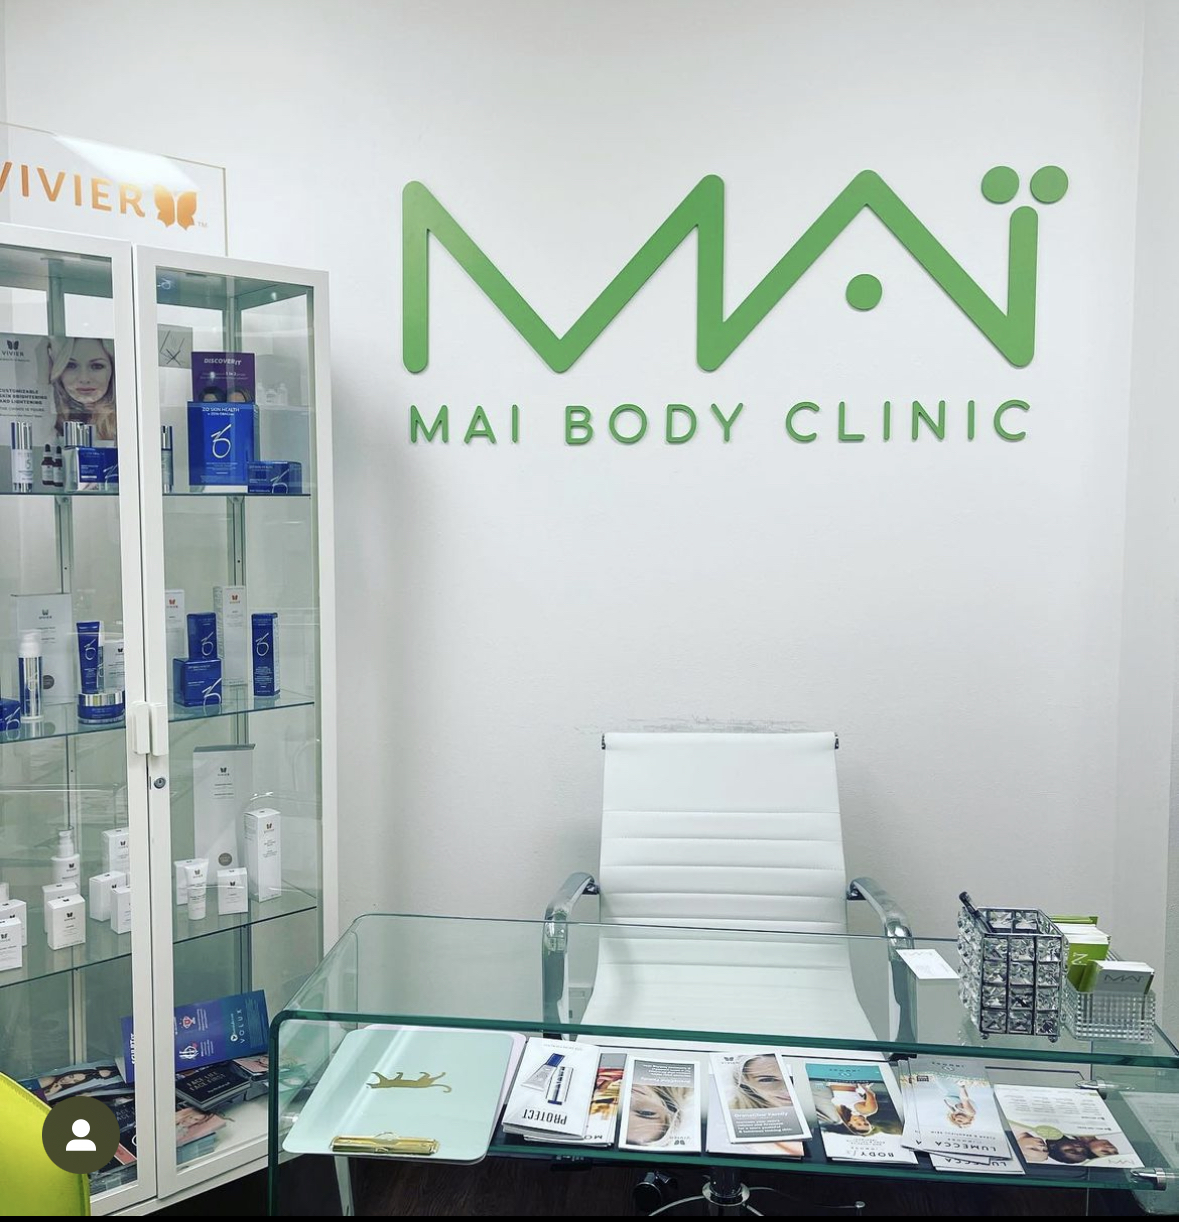 Aesthetic medical clinic specializing in body treatments and skin care in calgary